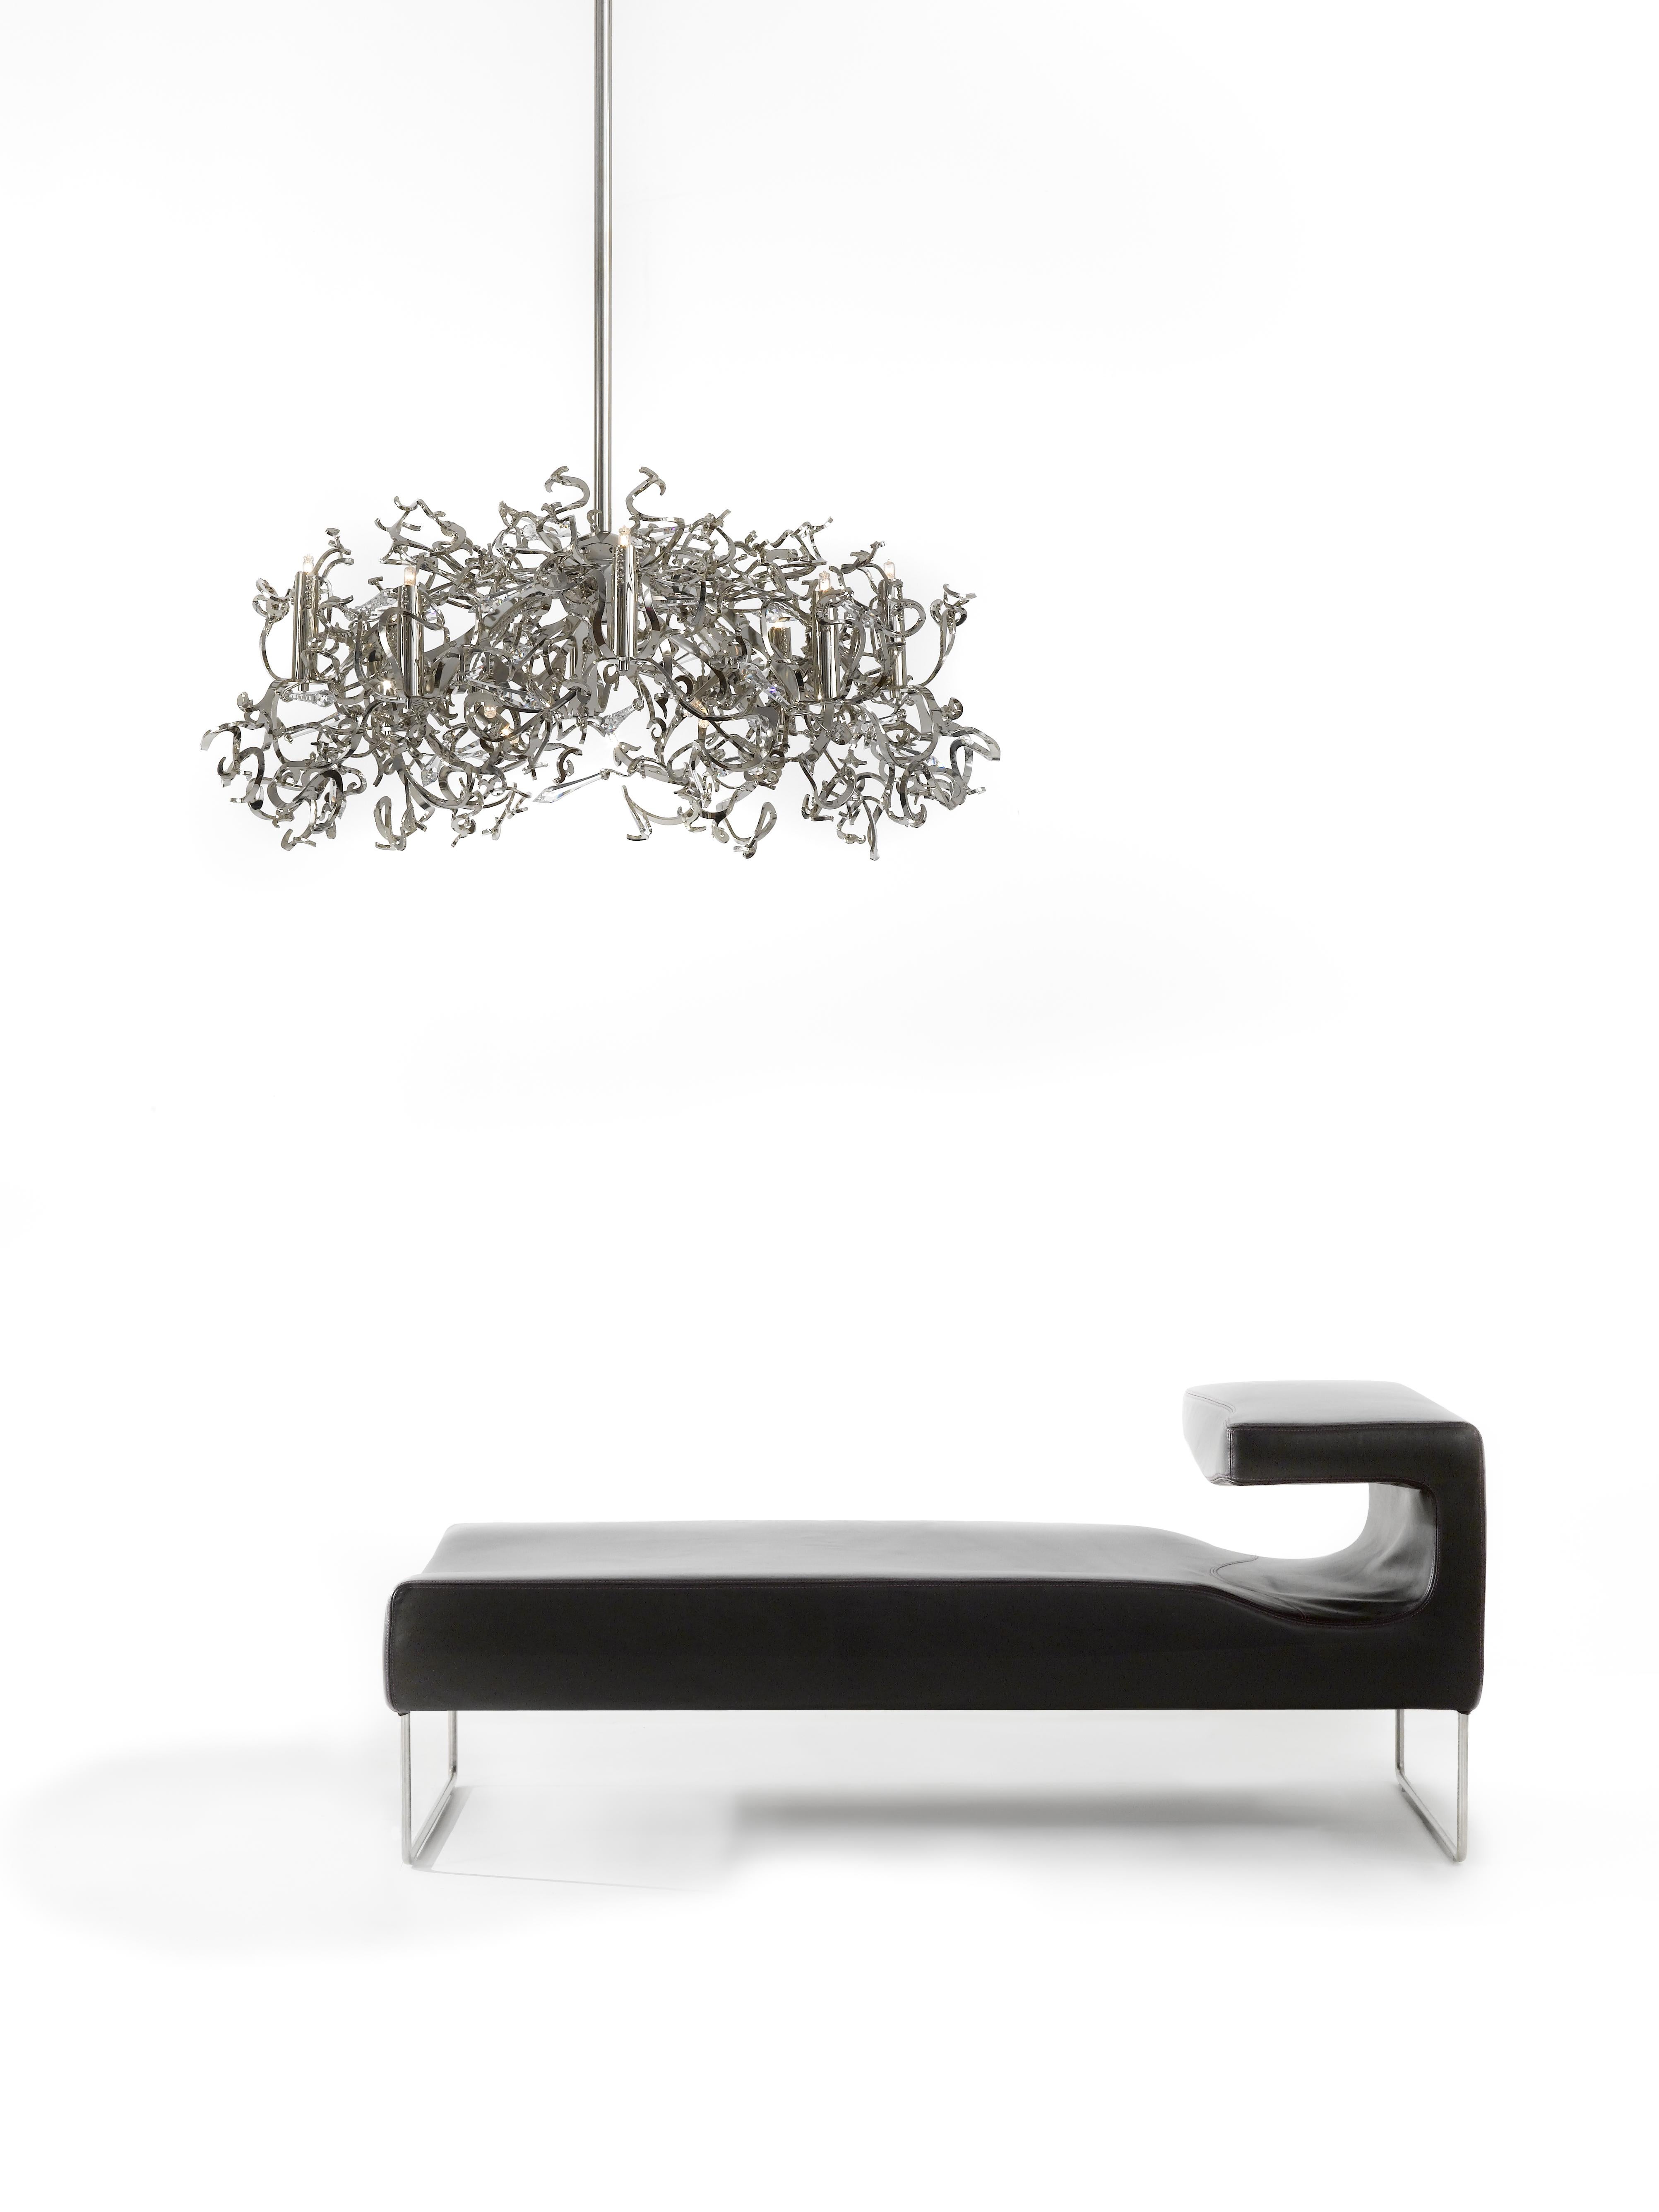 Modern Pendant in a Nickel Finish, Icy Lady Collection, by Brand van Egmond